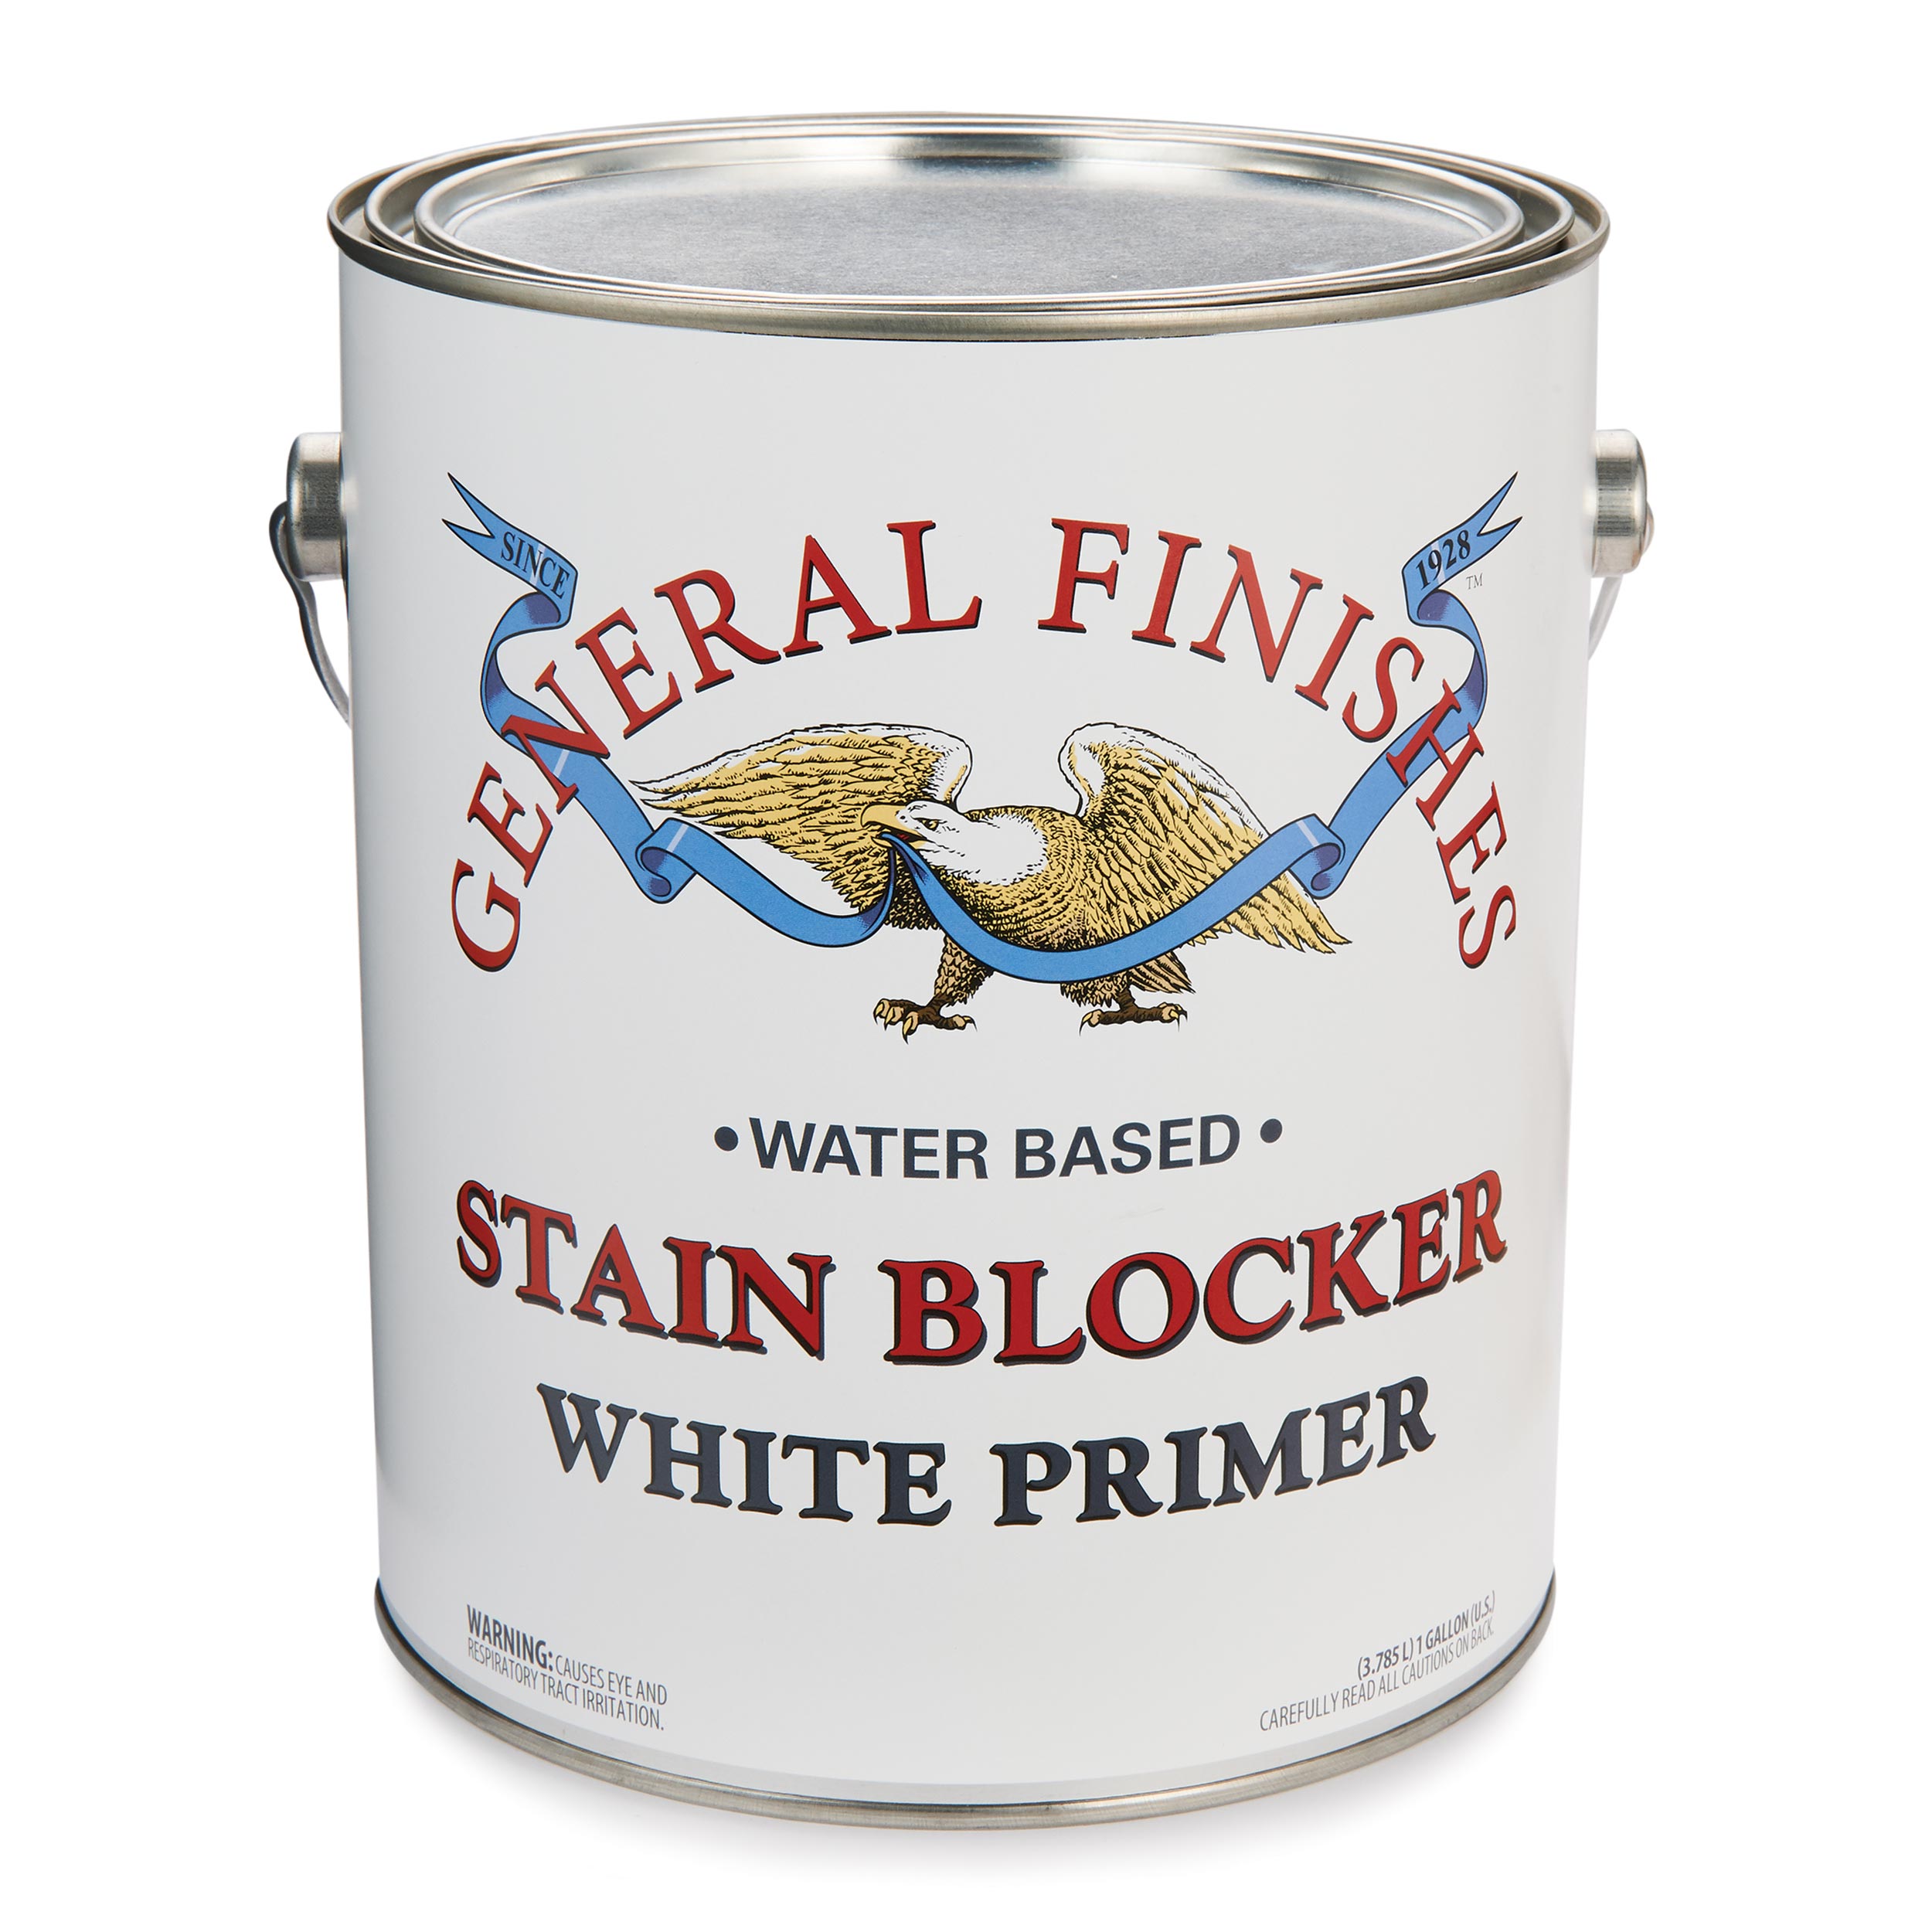 General Finishes Stain Blocker Gallon